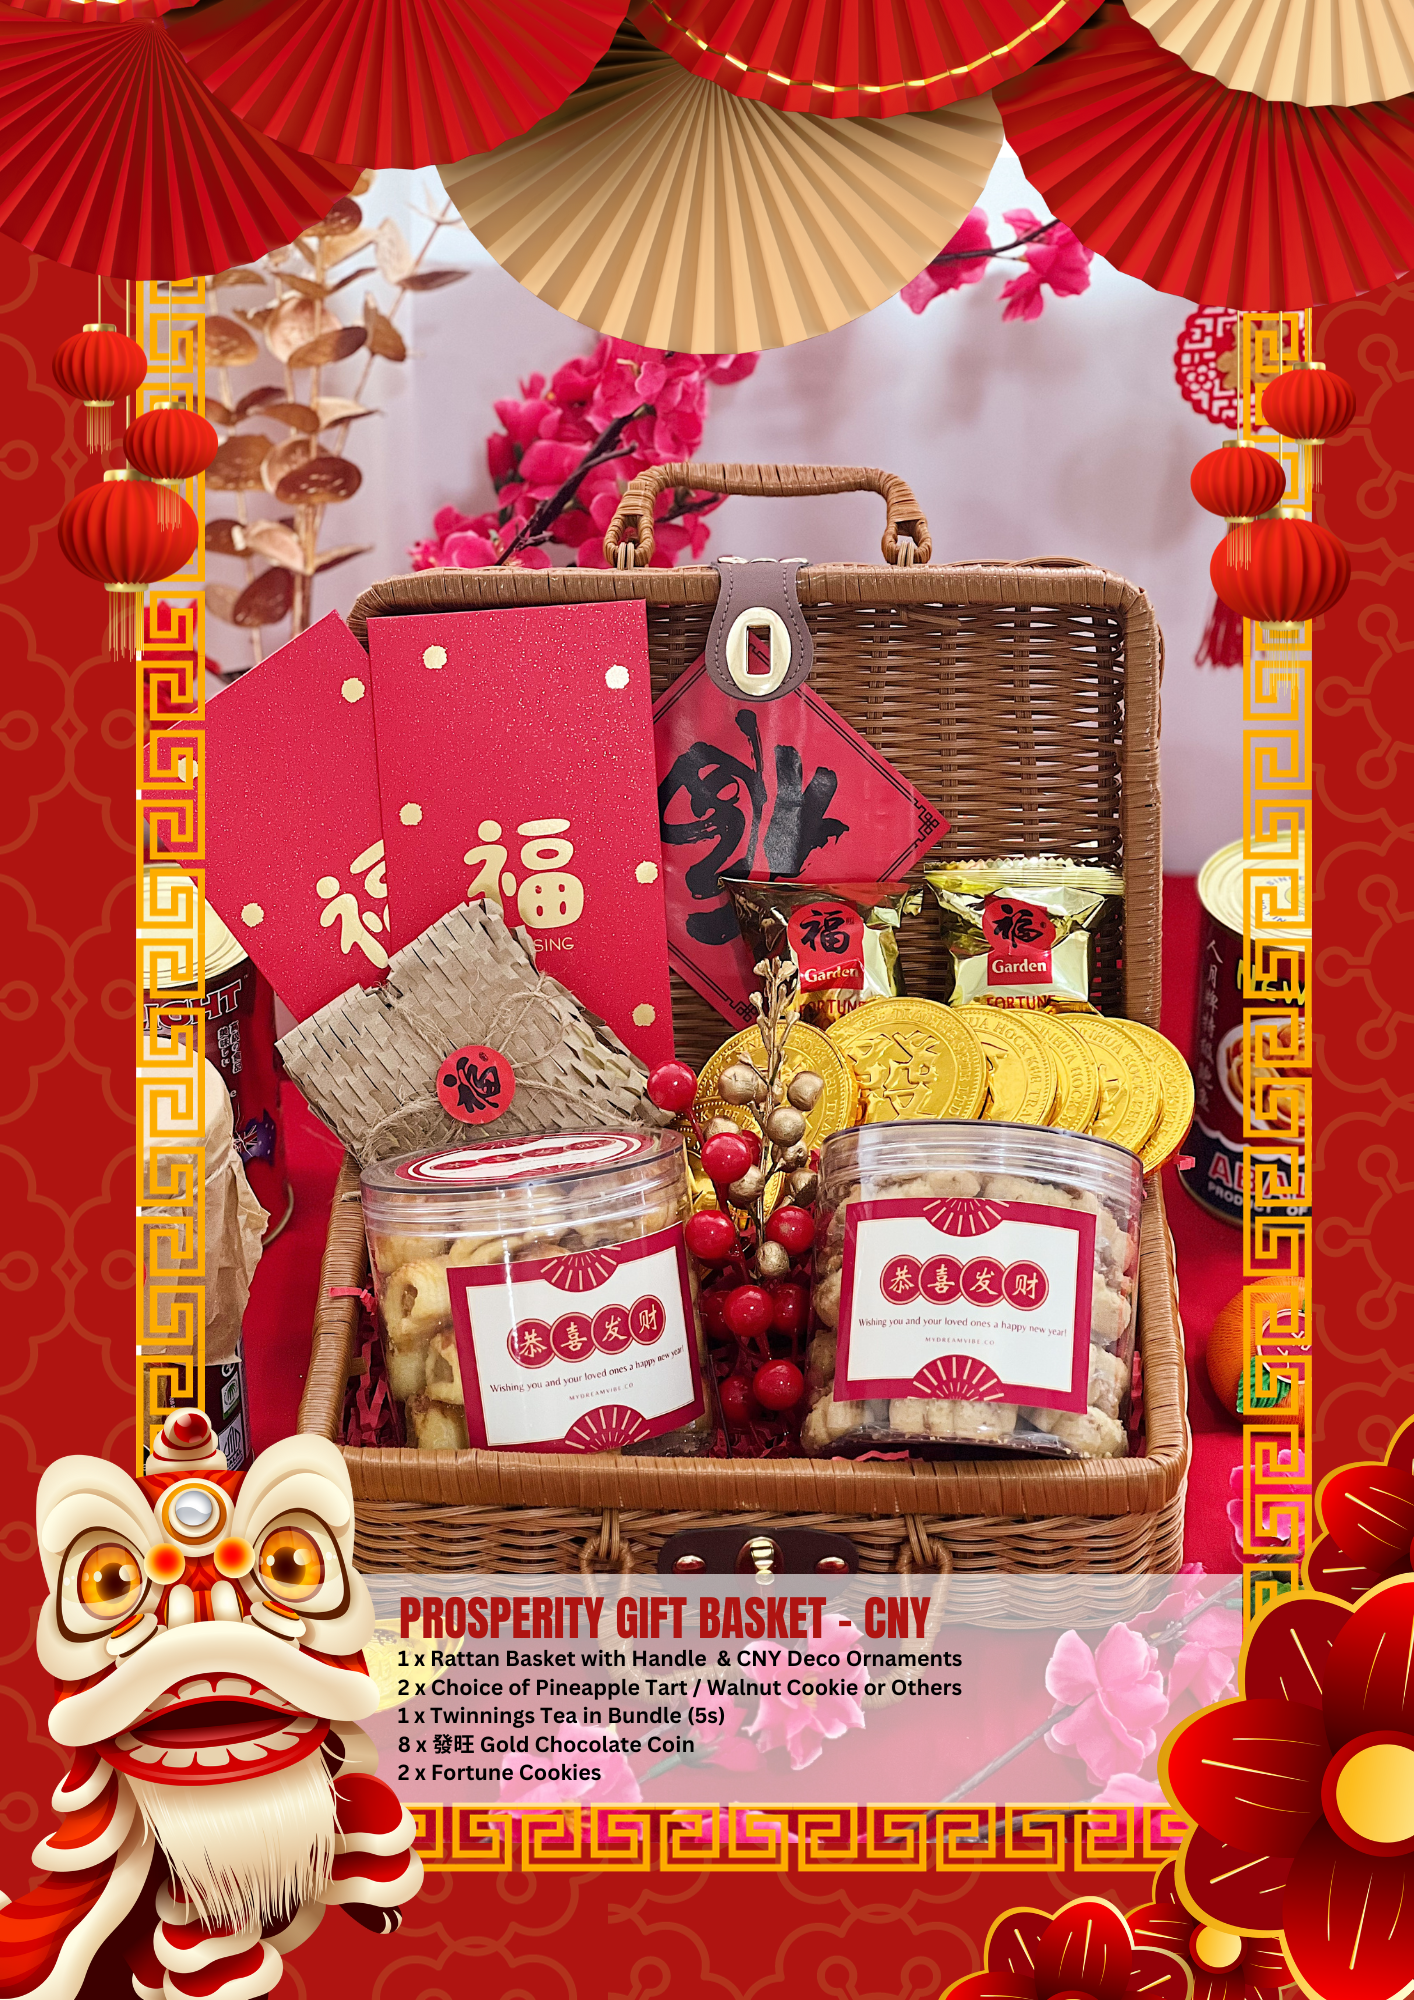  PROSPERITY Gift Basket - Chinese New Year ((Whatsapp to Order / Enquire)